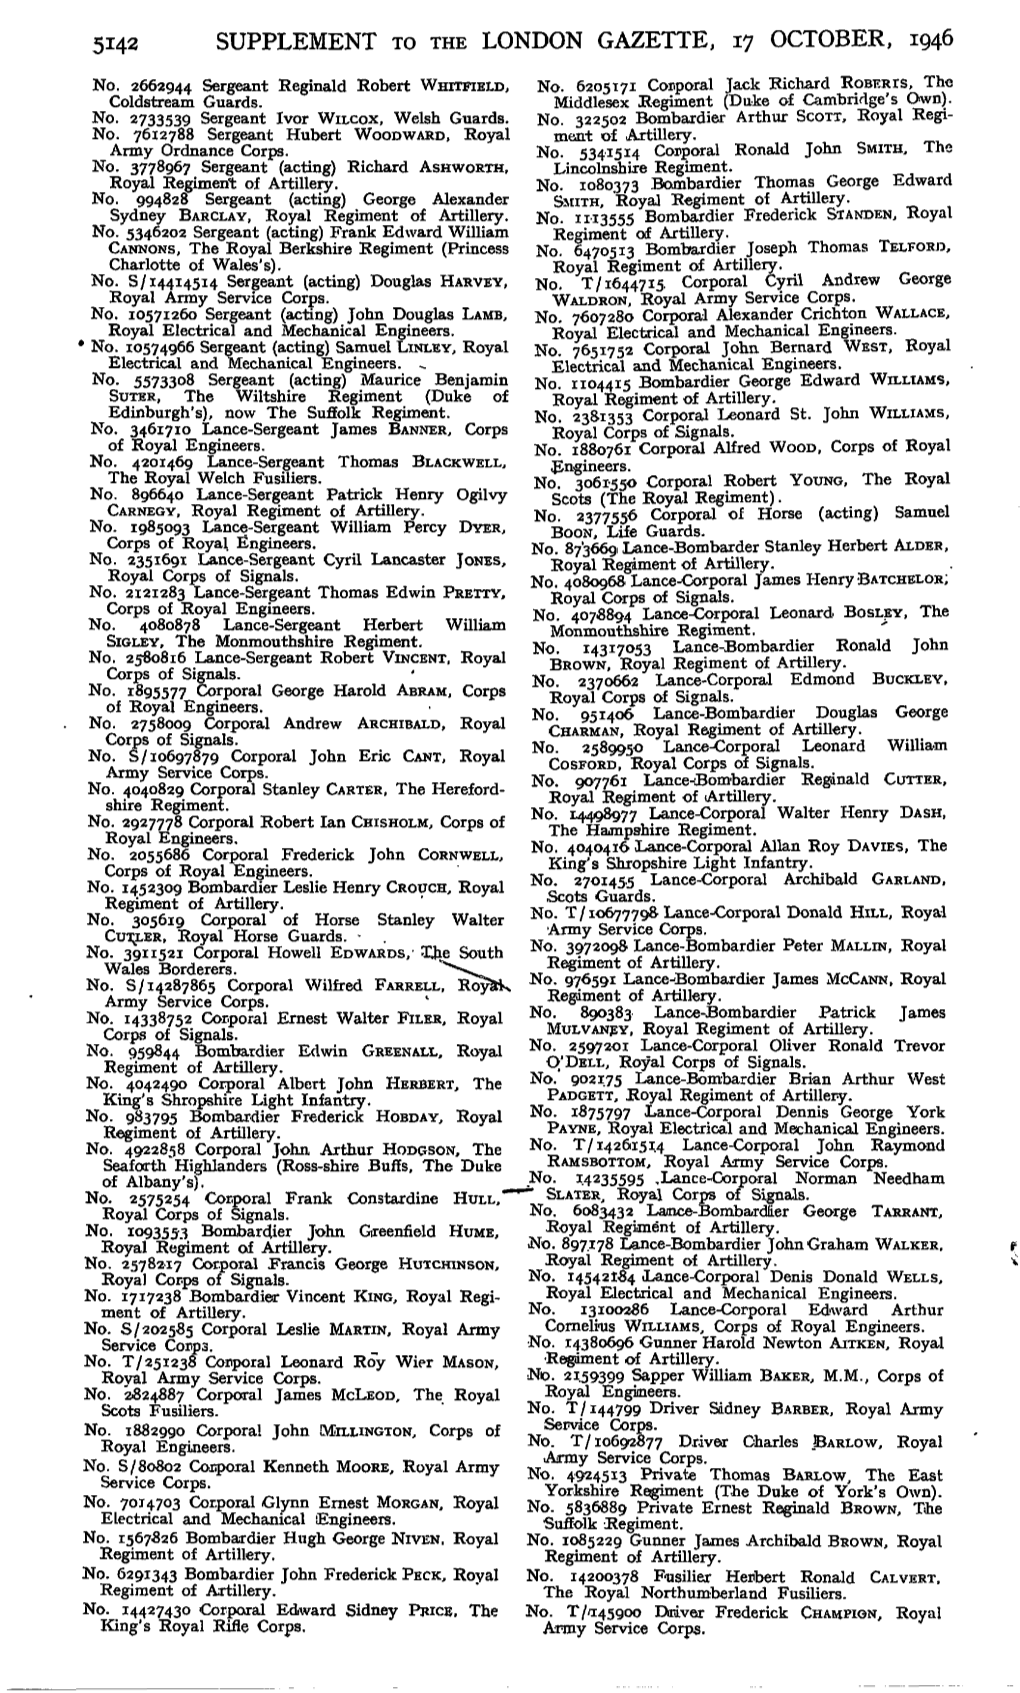 5142 Supplement to the London Gazette, 17 October, 1946